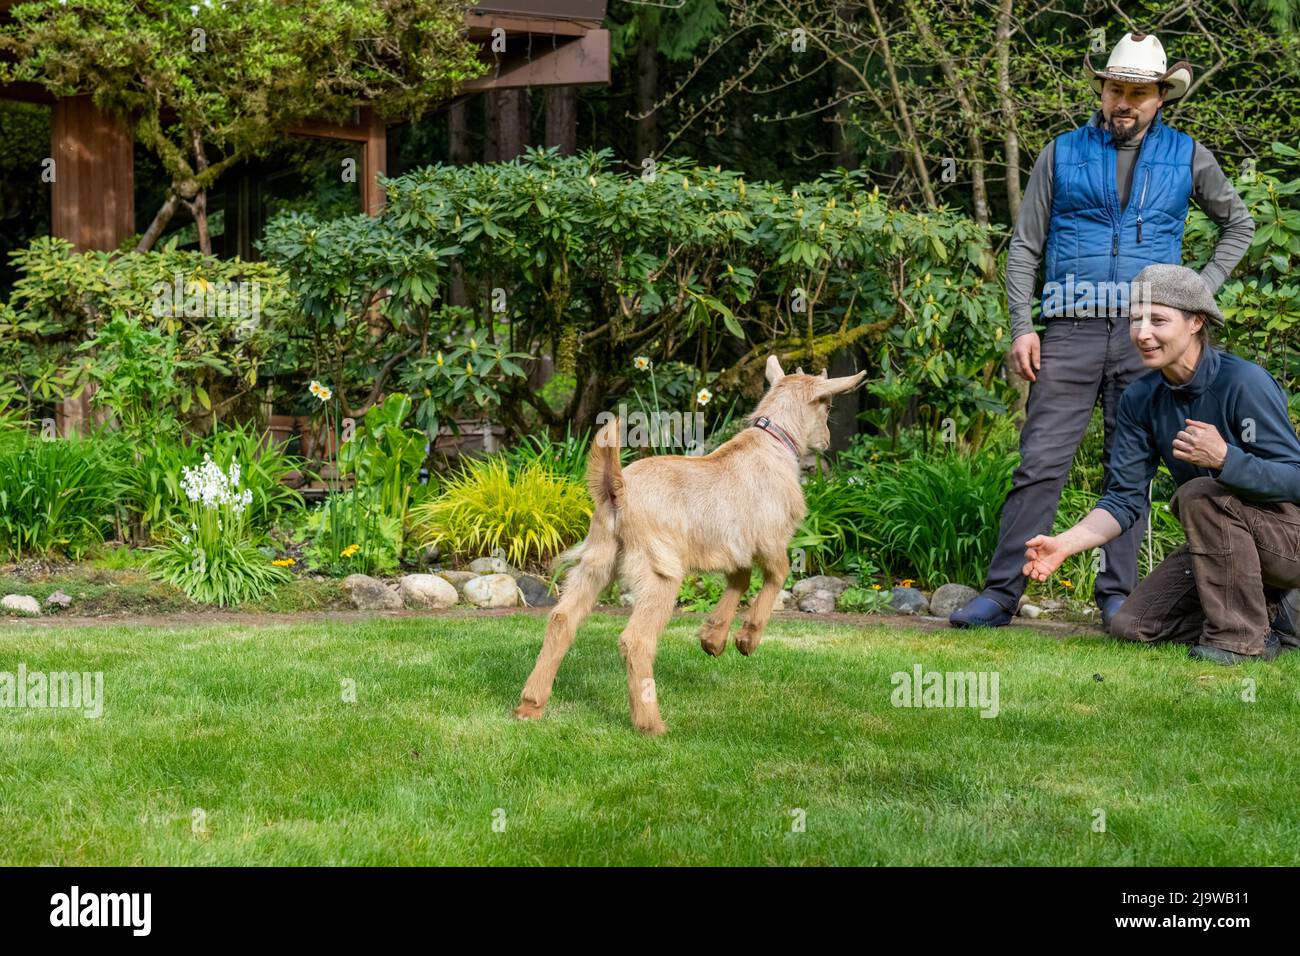 Issaquah, Washington, USA.  Three week old male Guernsey Goat kid running and jumping in a grassy yard with his owners Stock Photo